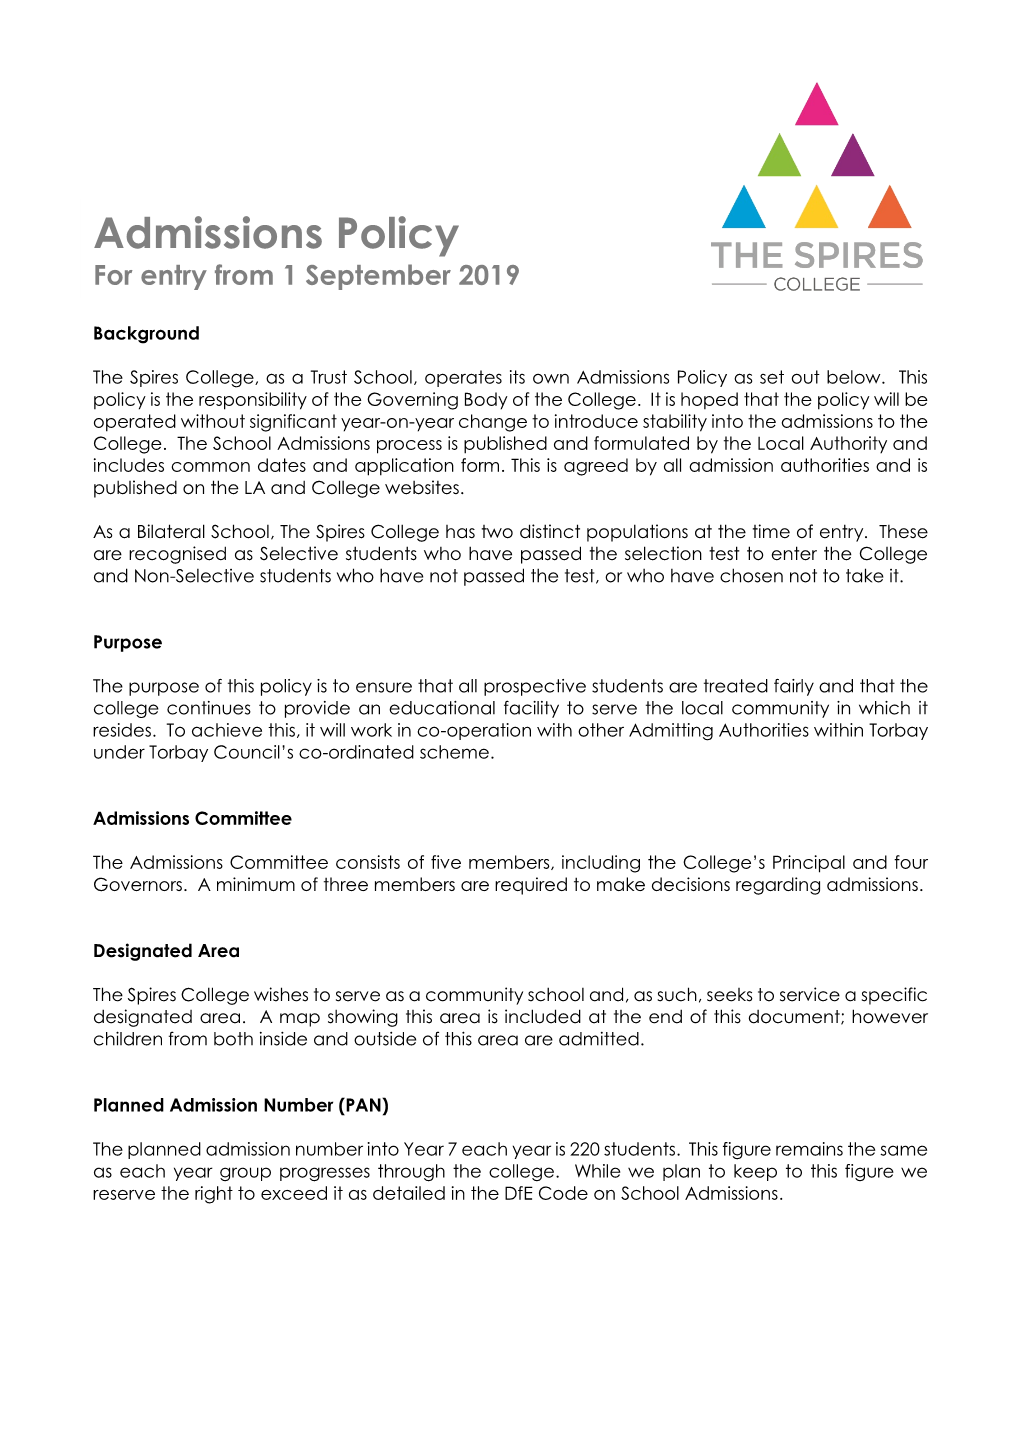 The Spires College, As a Trust School, Operates Its Own Admissions Policy As Set out Below